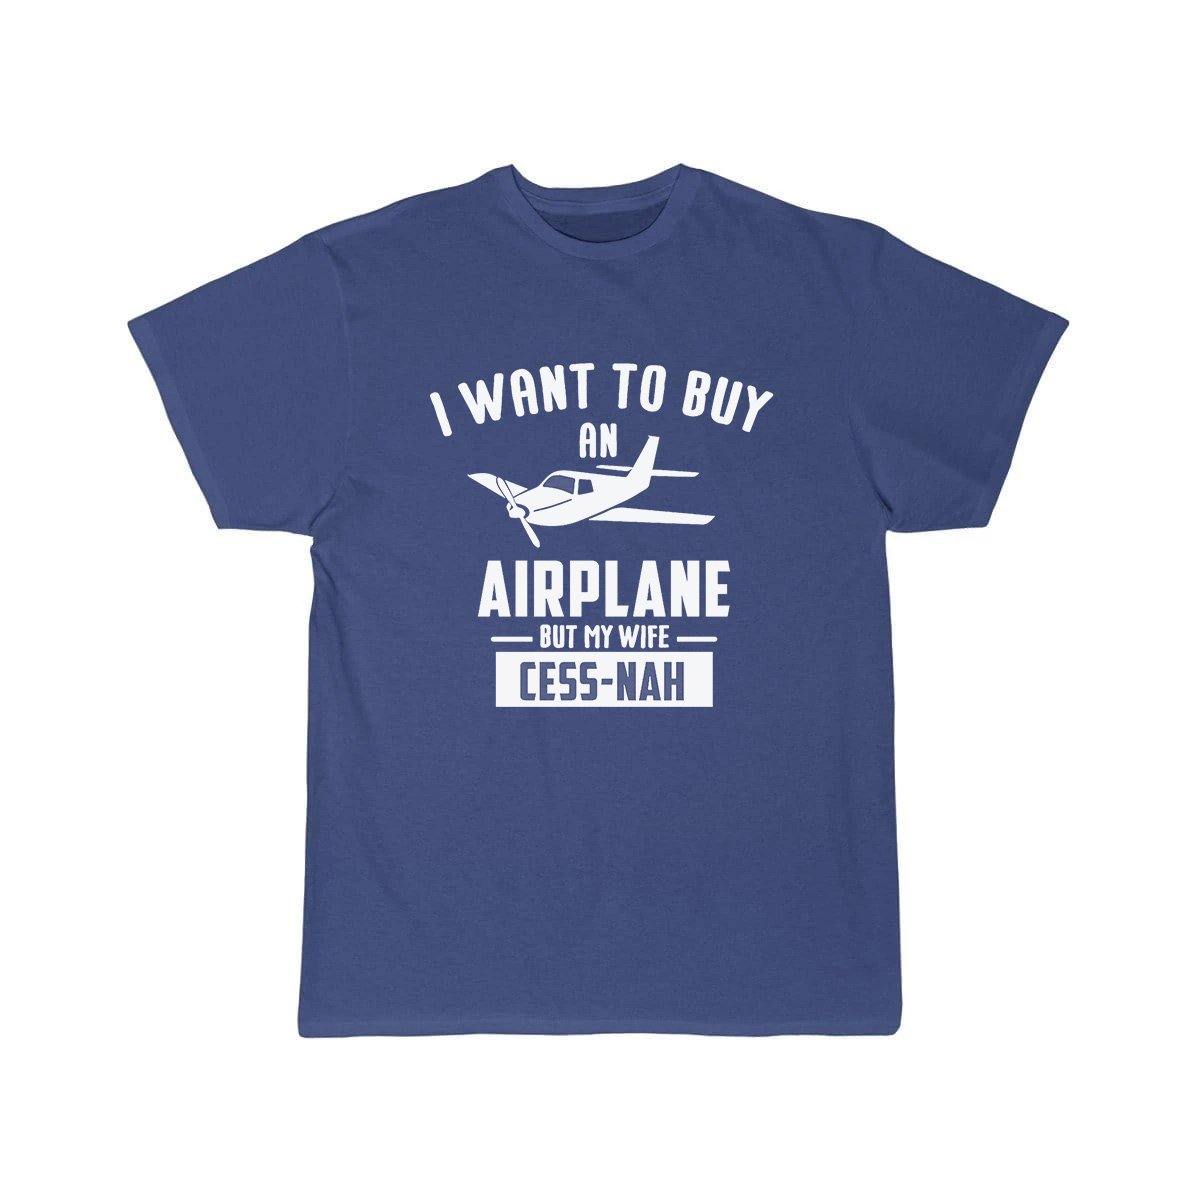 I WANT TO BUY AN AIRPLANE BUT MY WIFE CESS-NAH T SHIRT THE AV8R